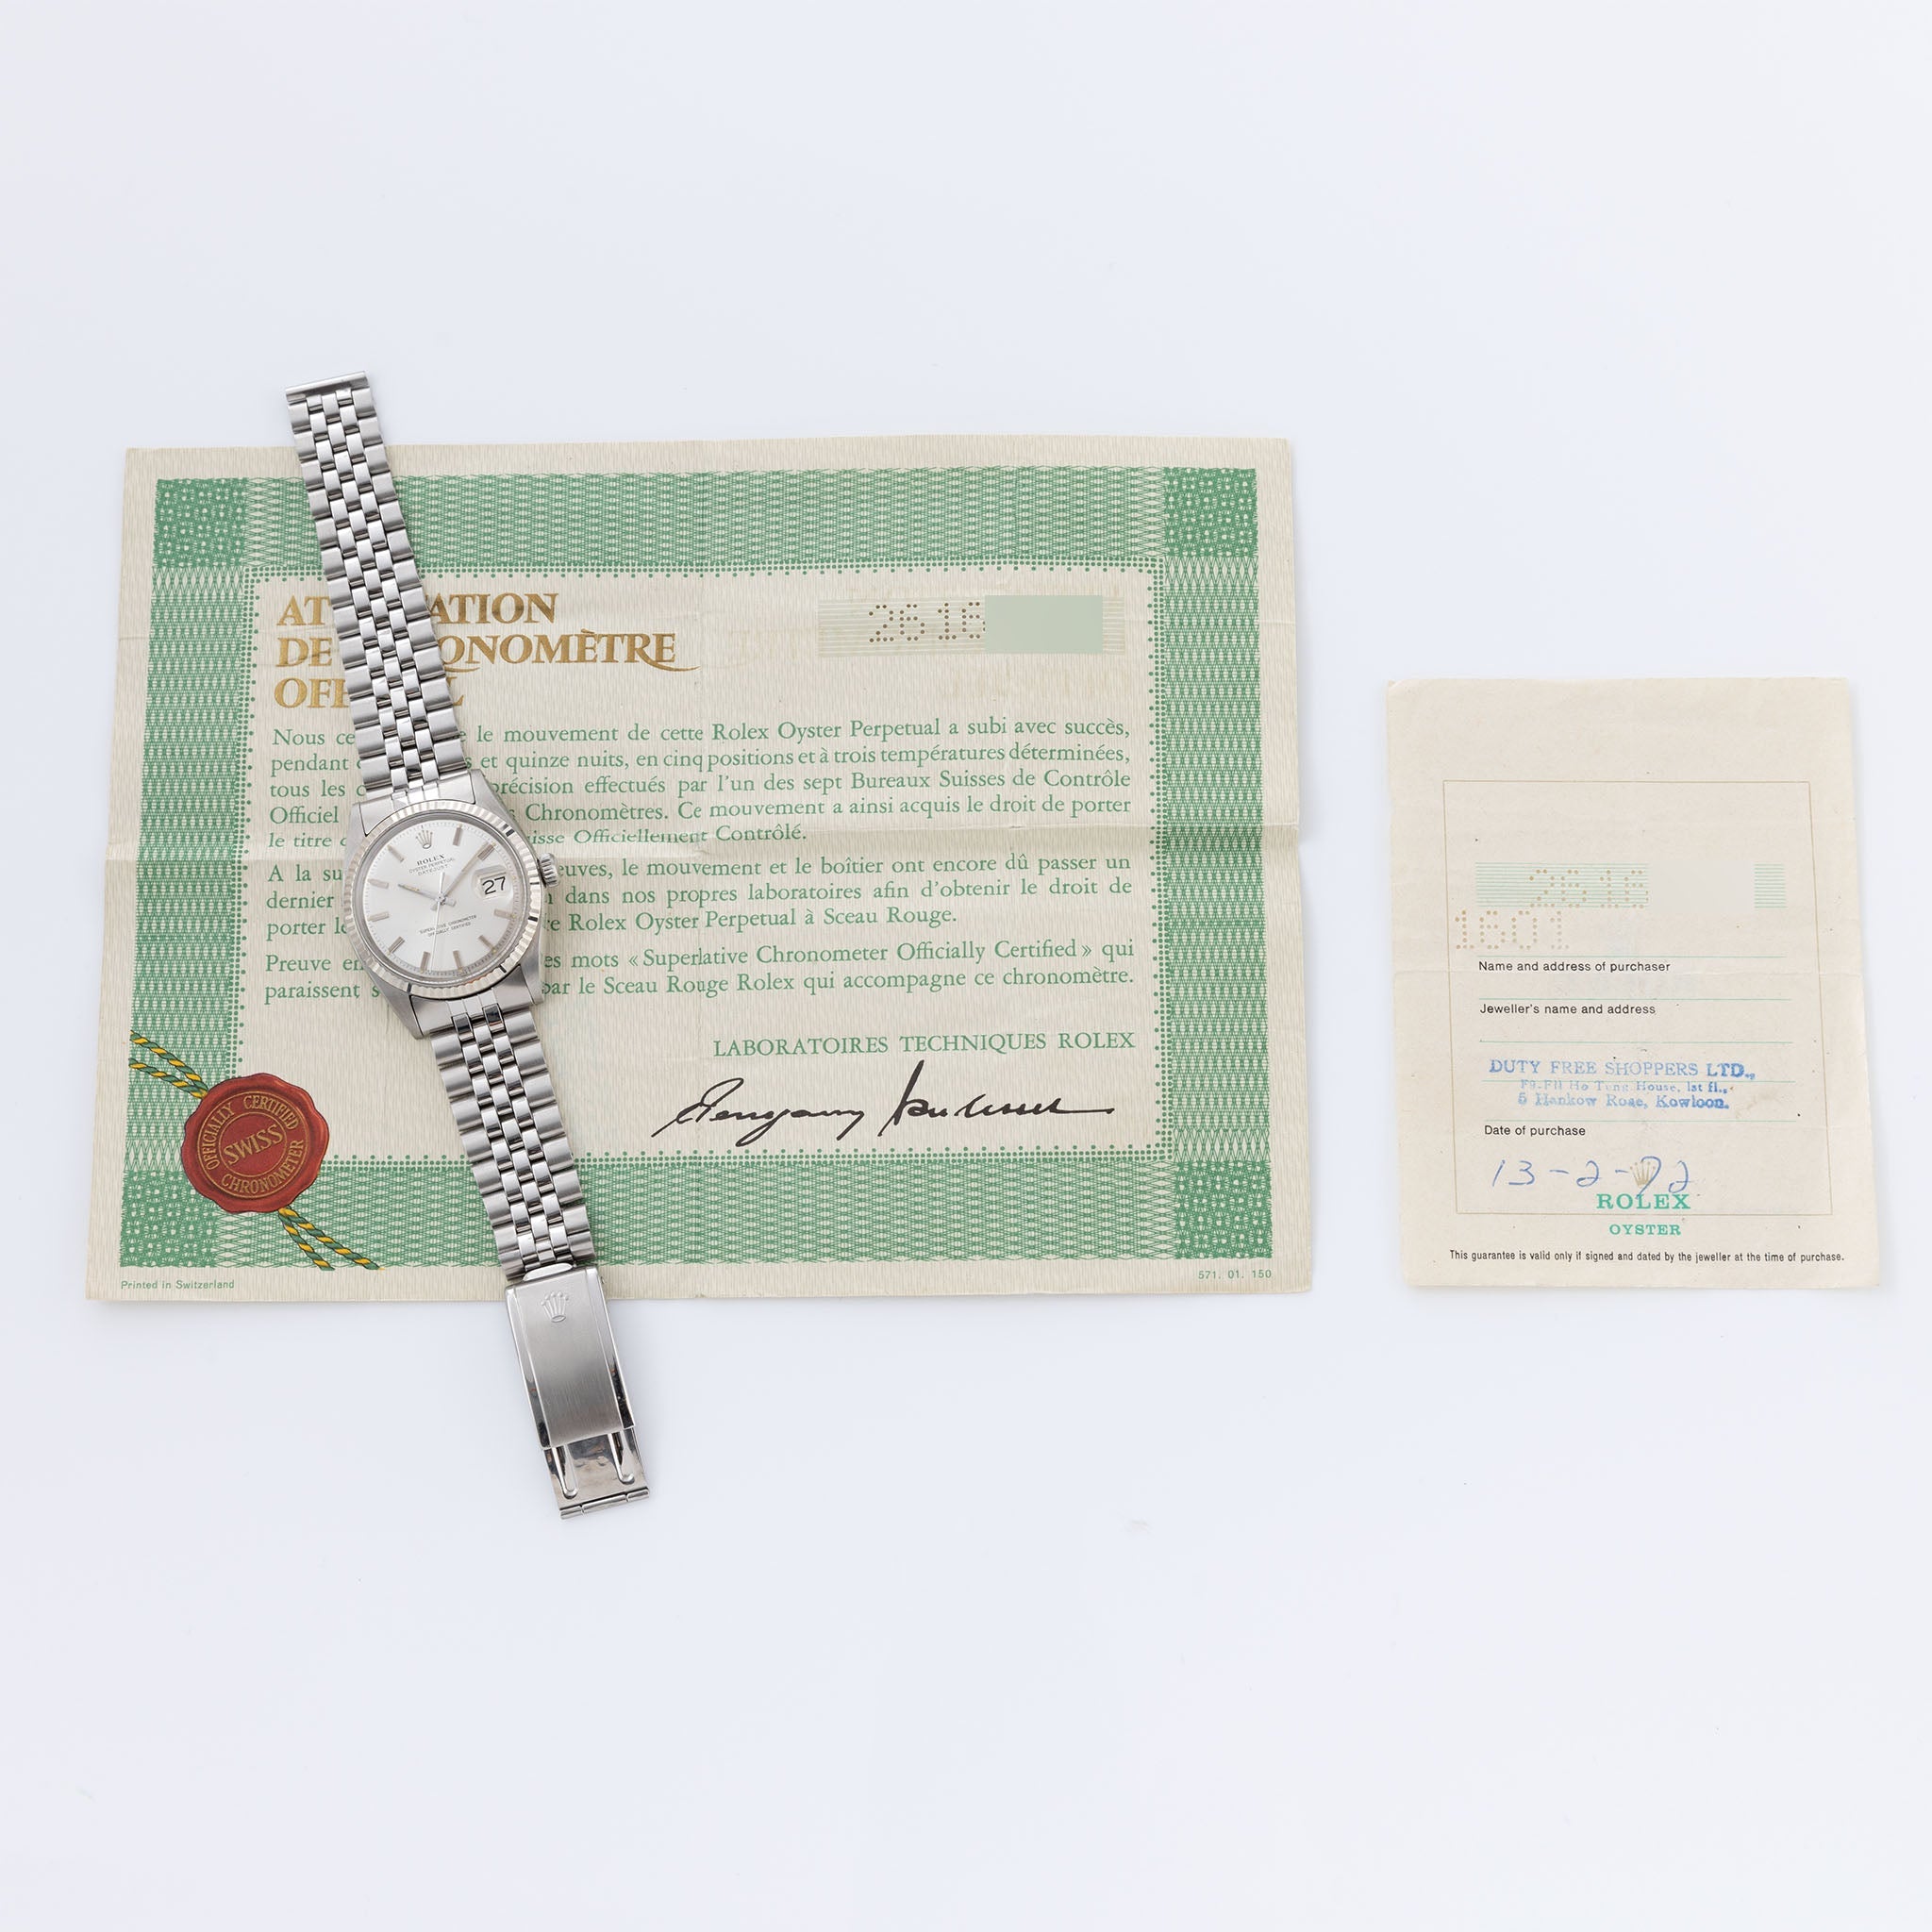 Rolex Datejust 1601 Silver Dial with Punched Papers